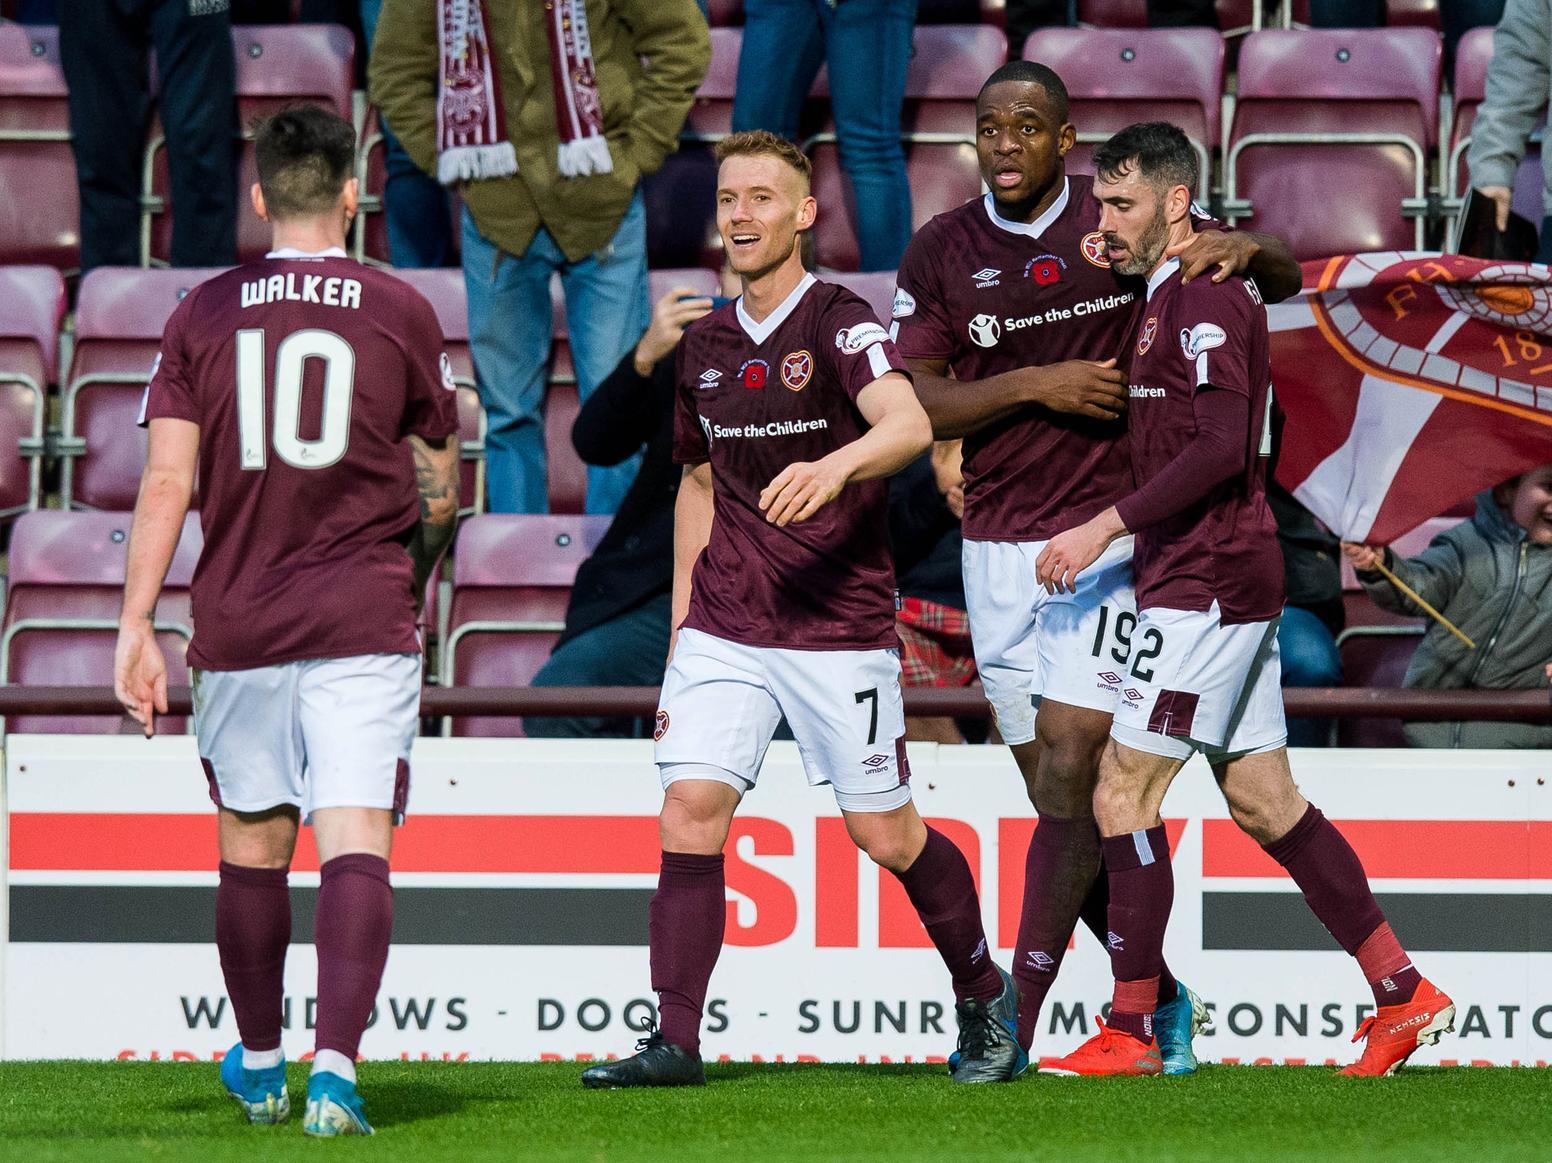 Hearts players celebrate against St. Mirren